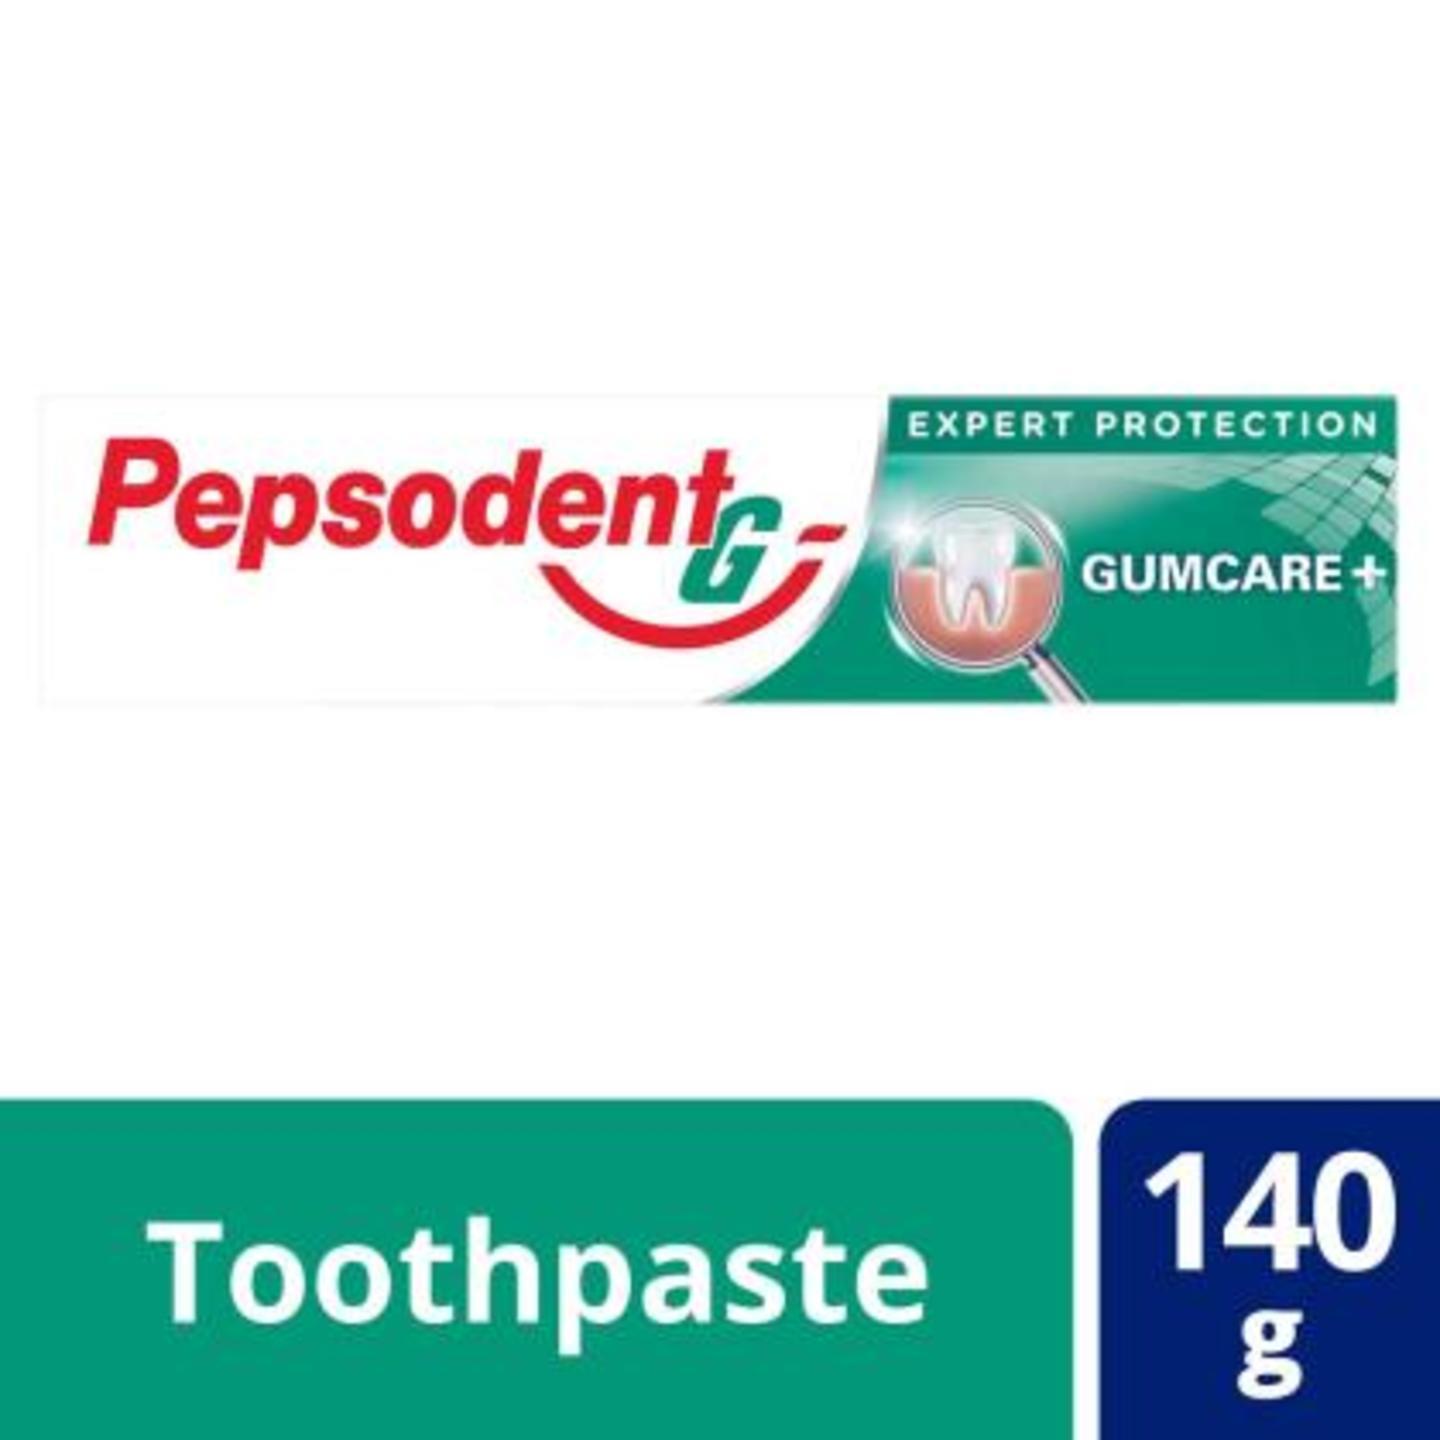 Pepsodent Expert Protection Gum Care Toothpaste 140 g